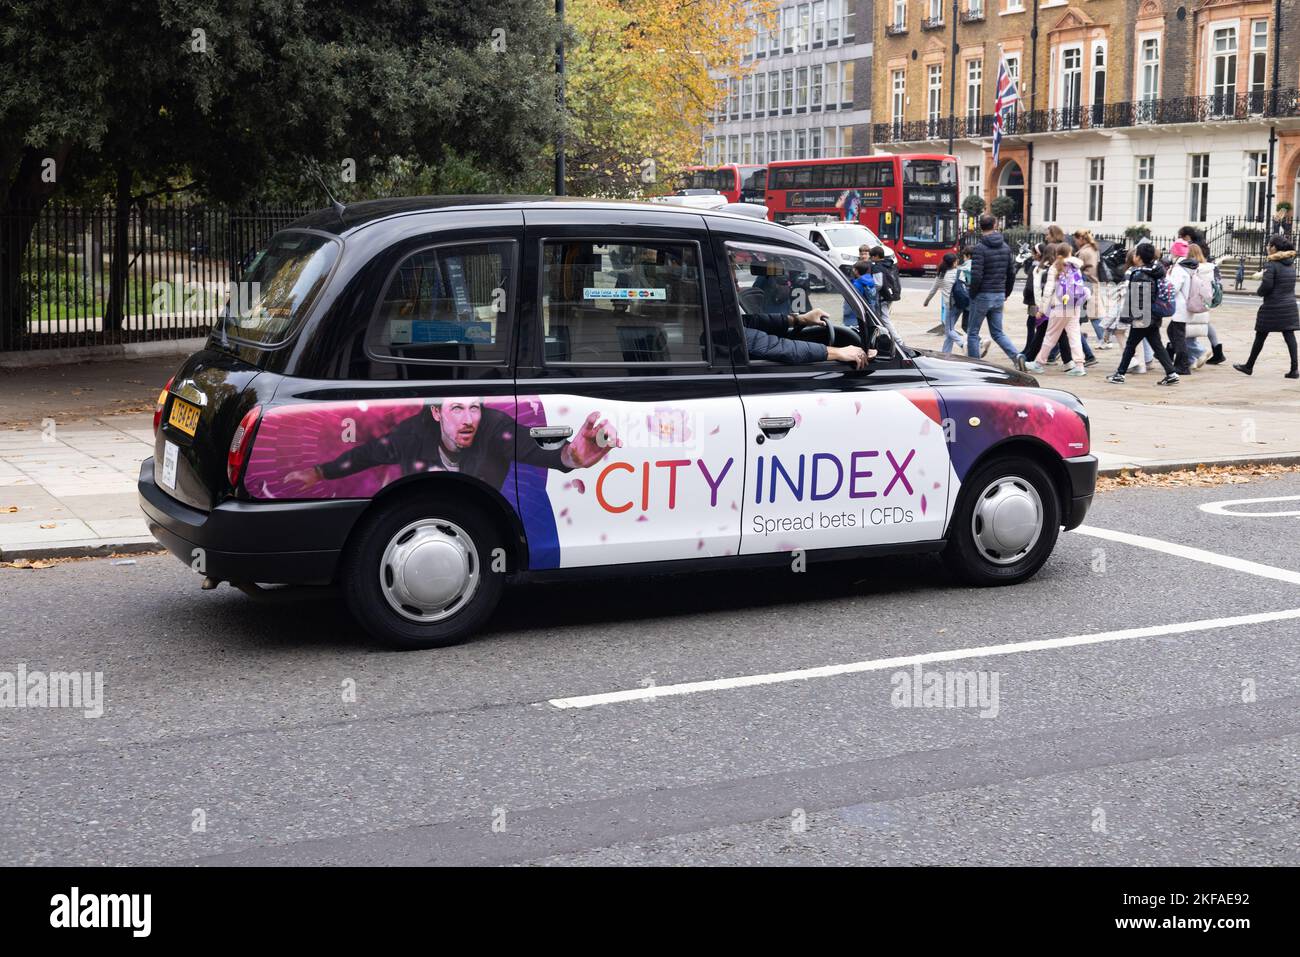 London Taxi advertising; London black cab with City Index advertisement on its side, for a spread betting financial company, London UK Stock Photo